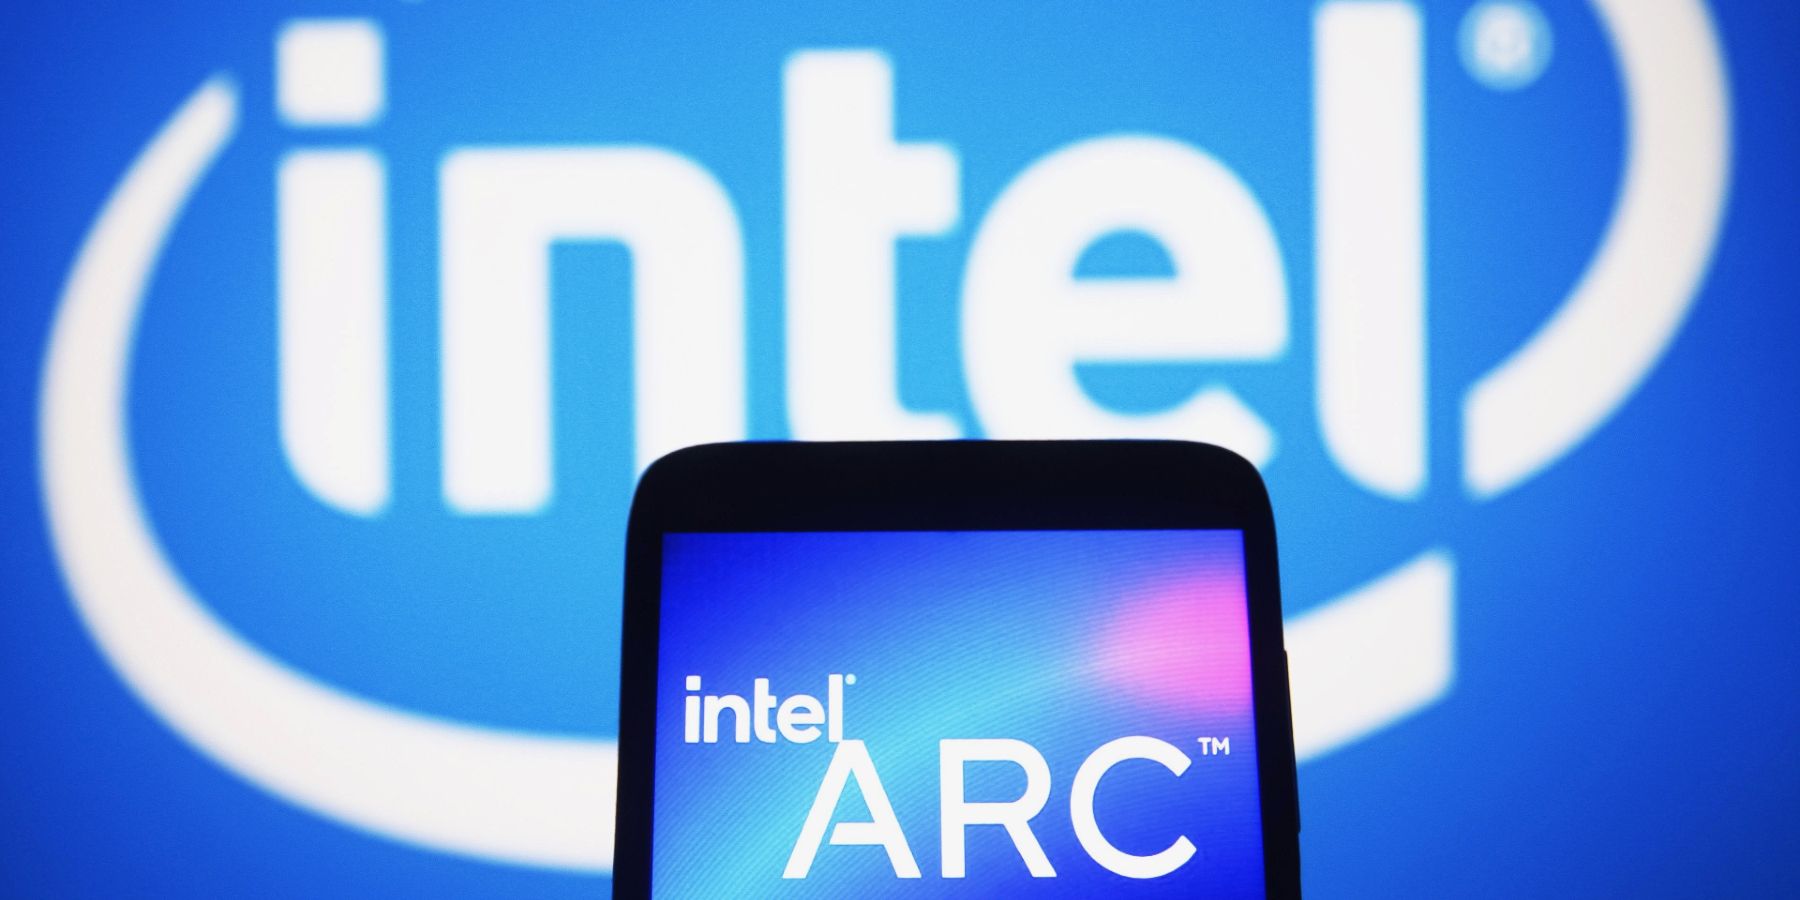 Image of a phone screen showing the Intel Arc logo with the main Intel logo in the background.